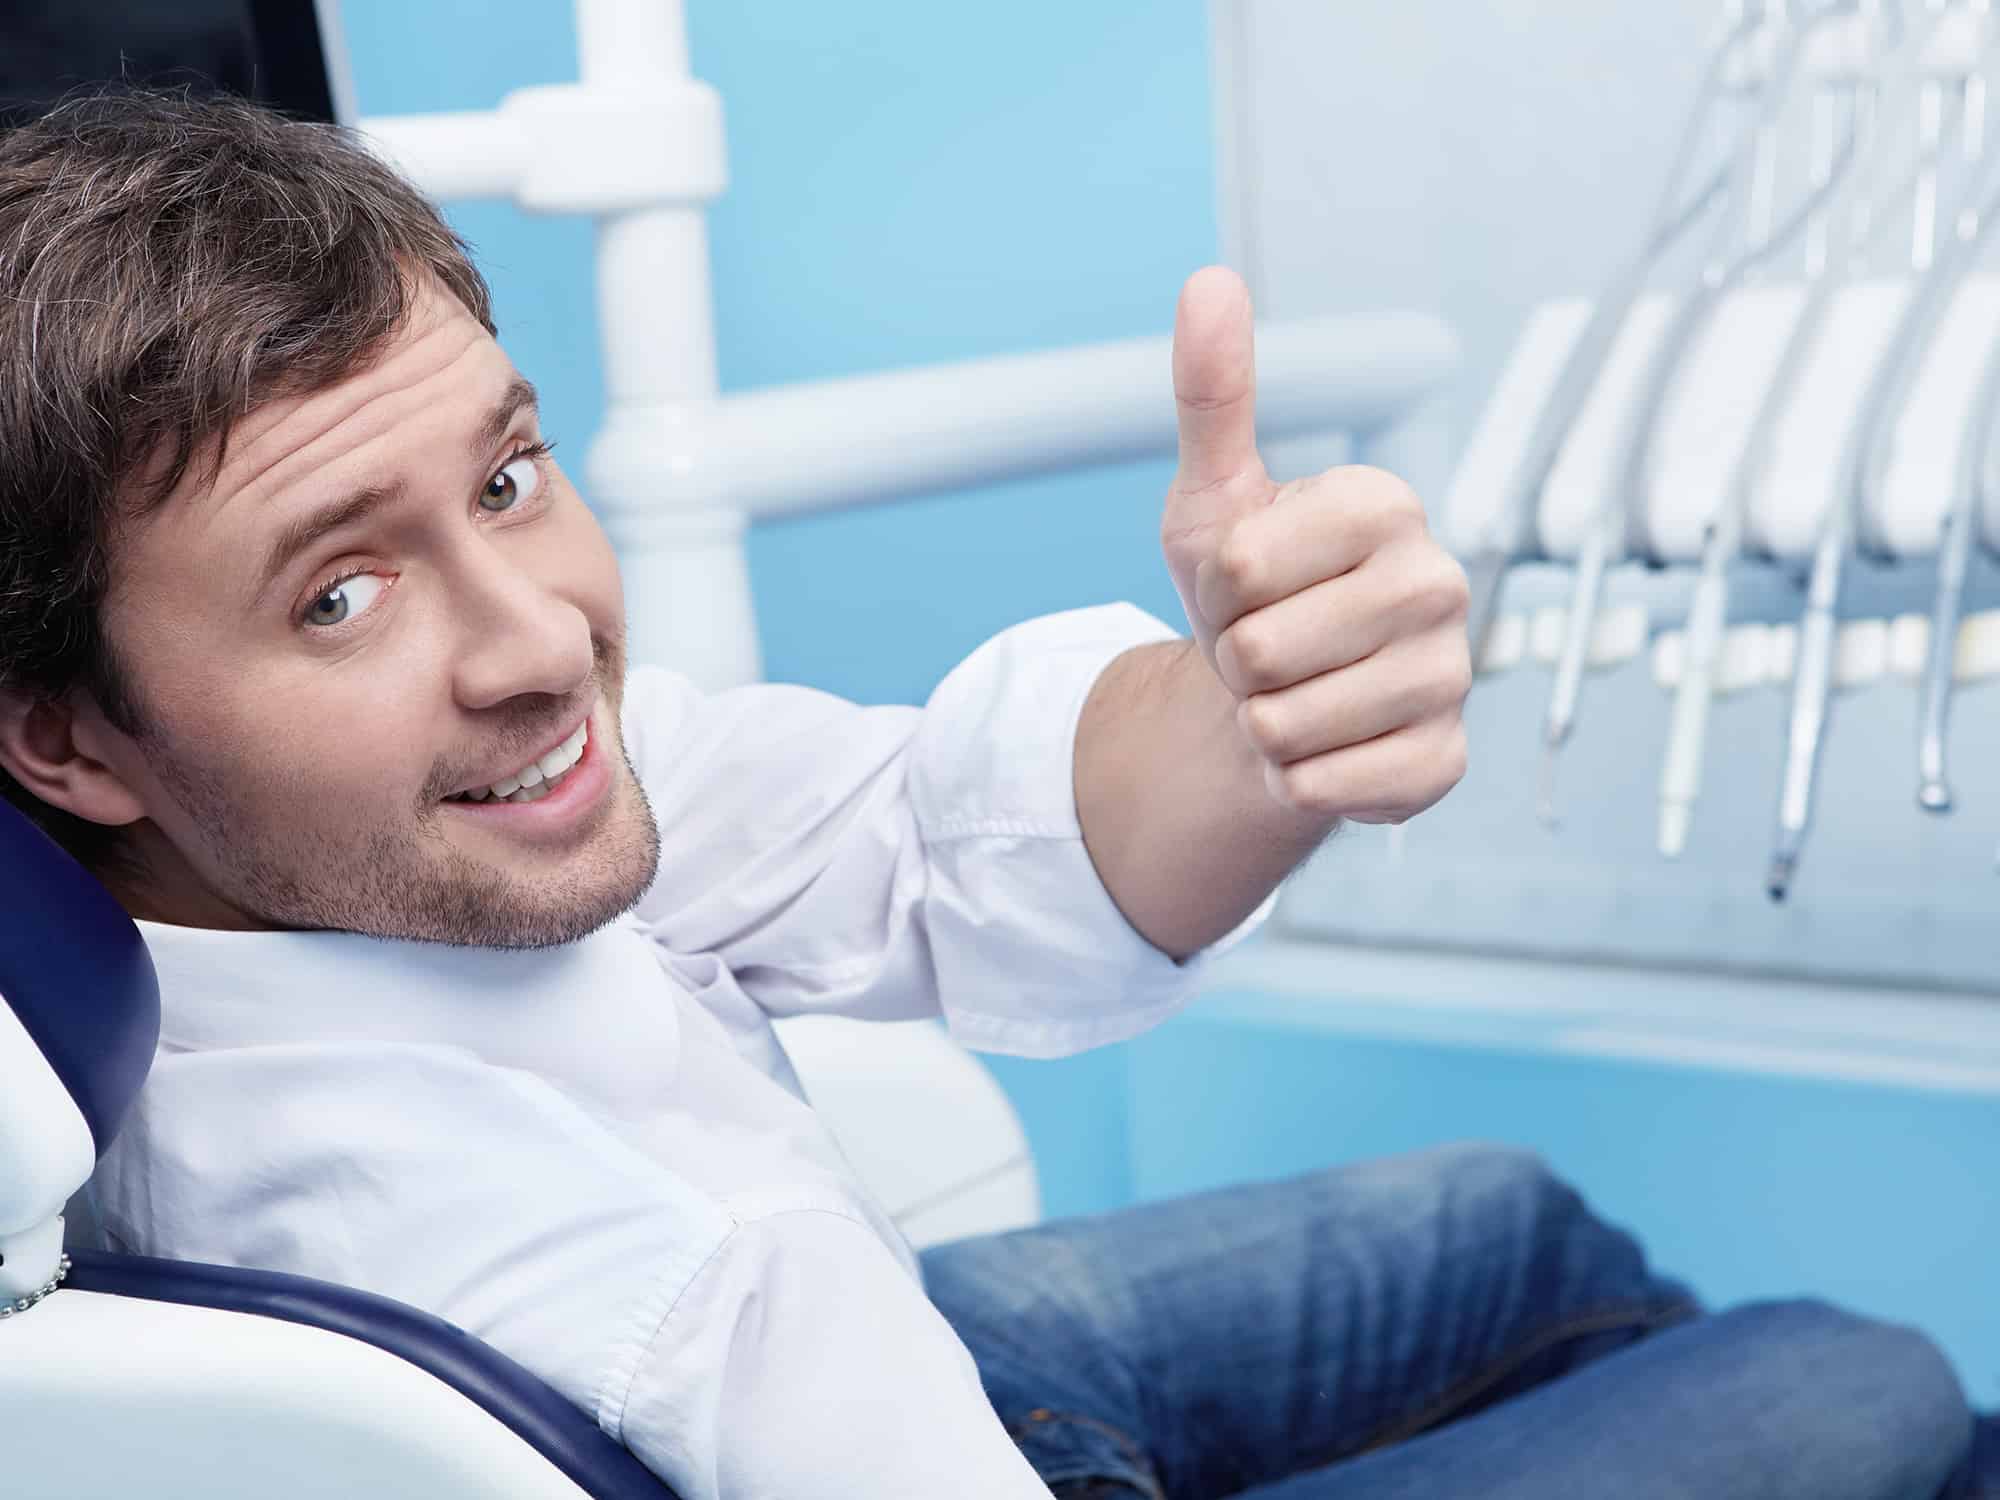  A man in a white shirt and blue jeans gives a thumbs up while sitting in a dentist's chair.